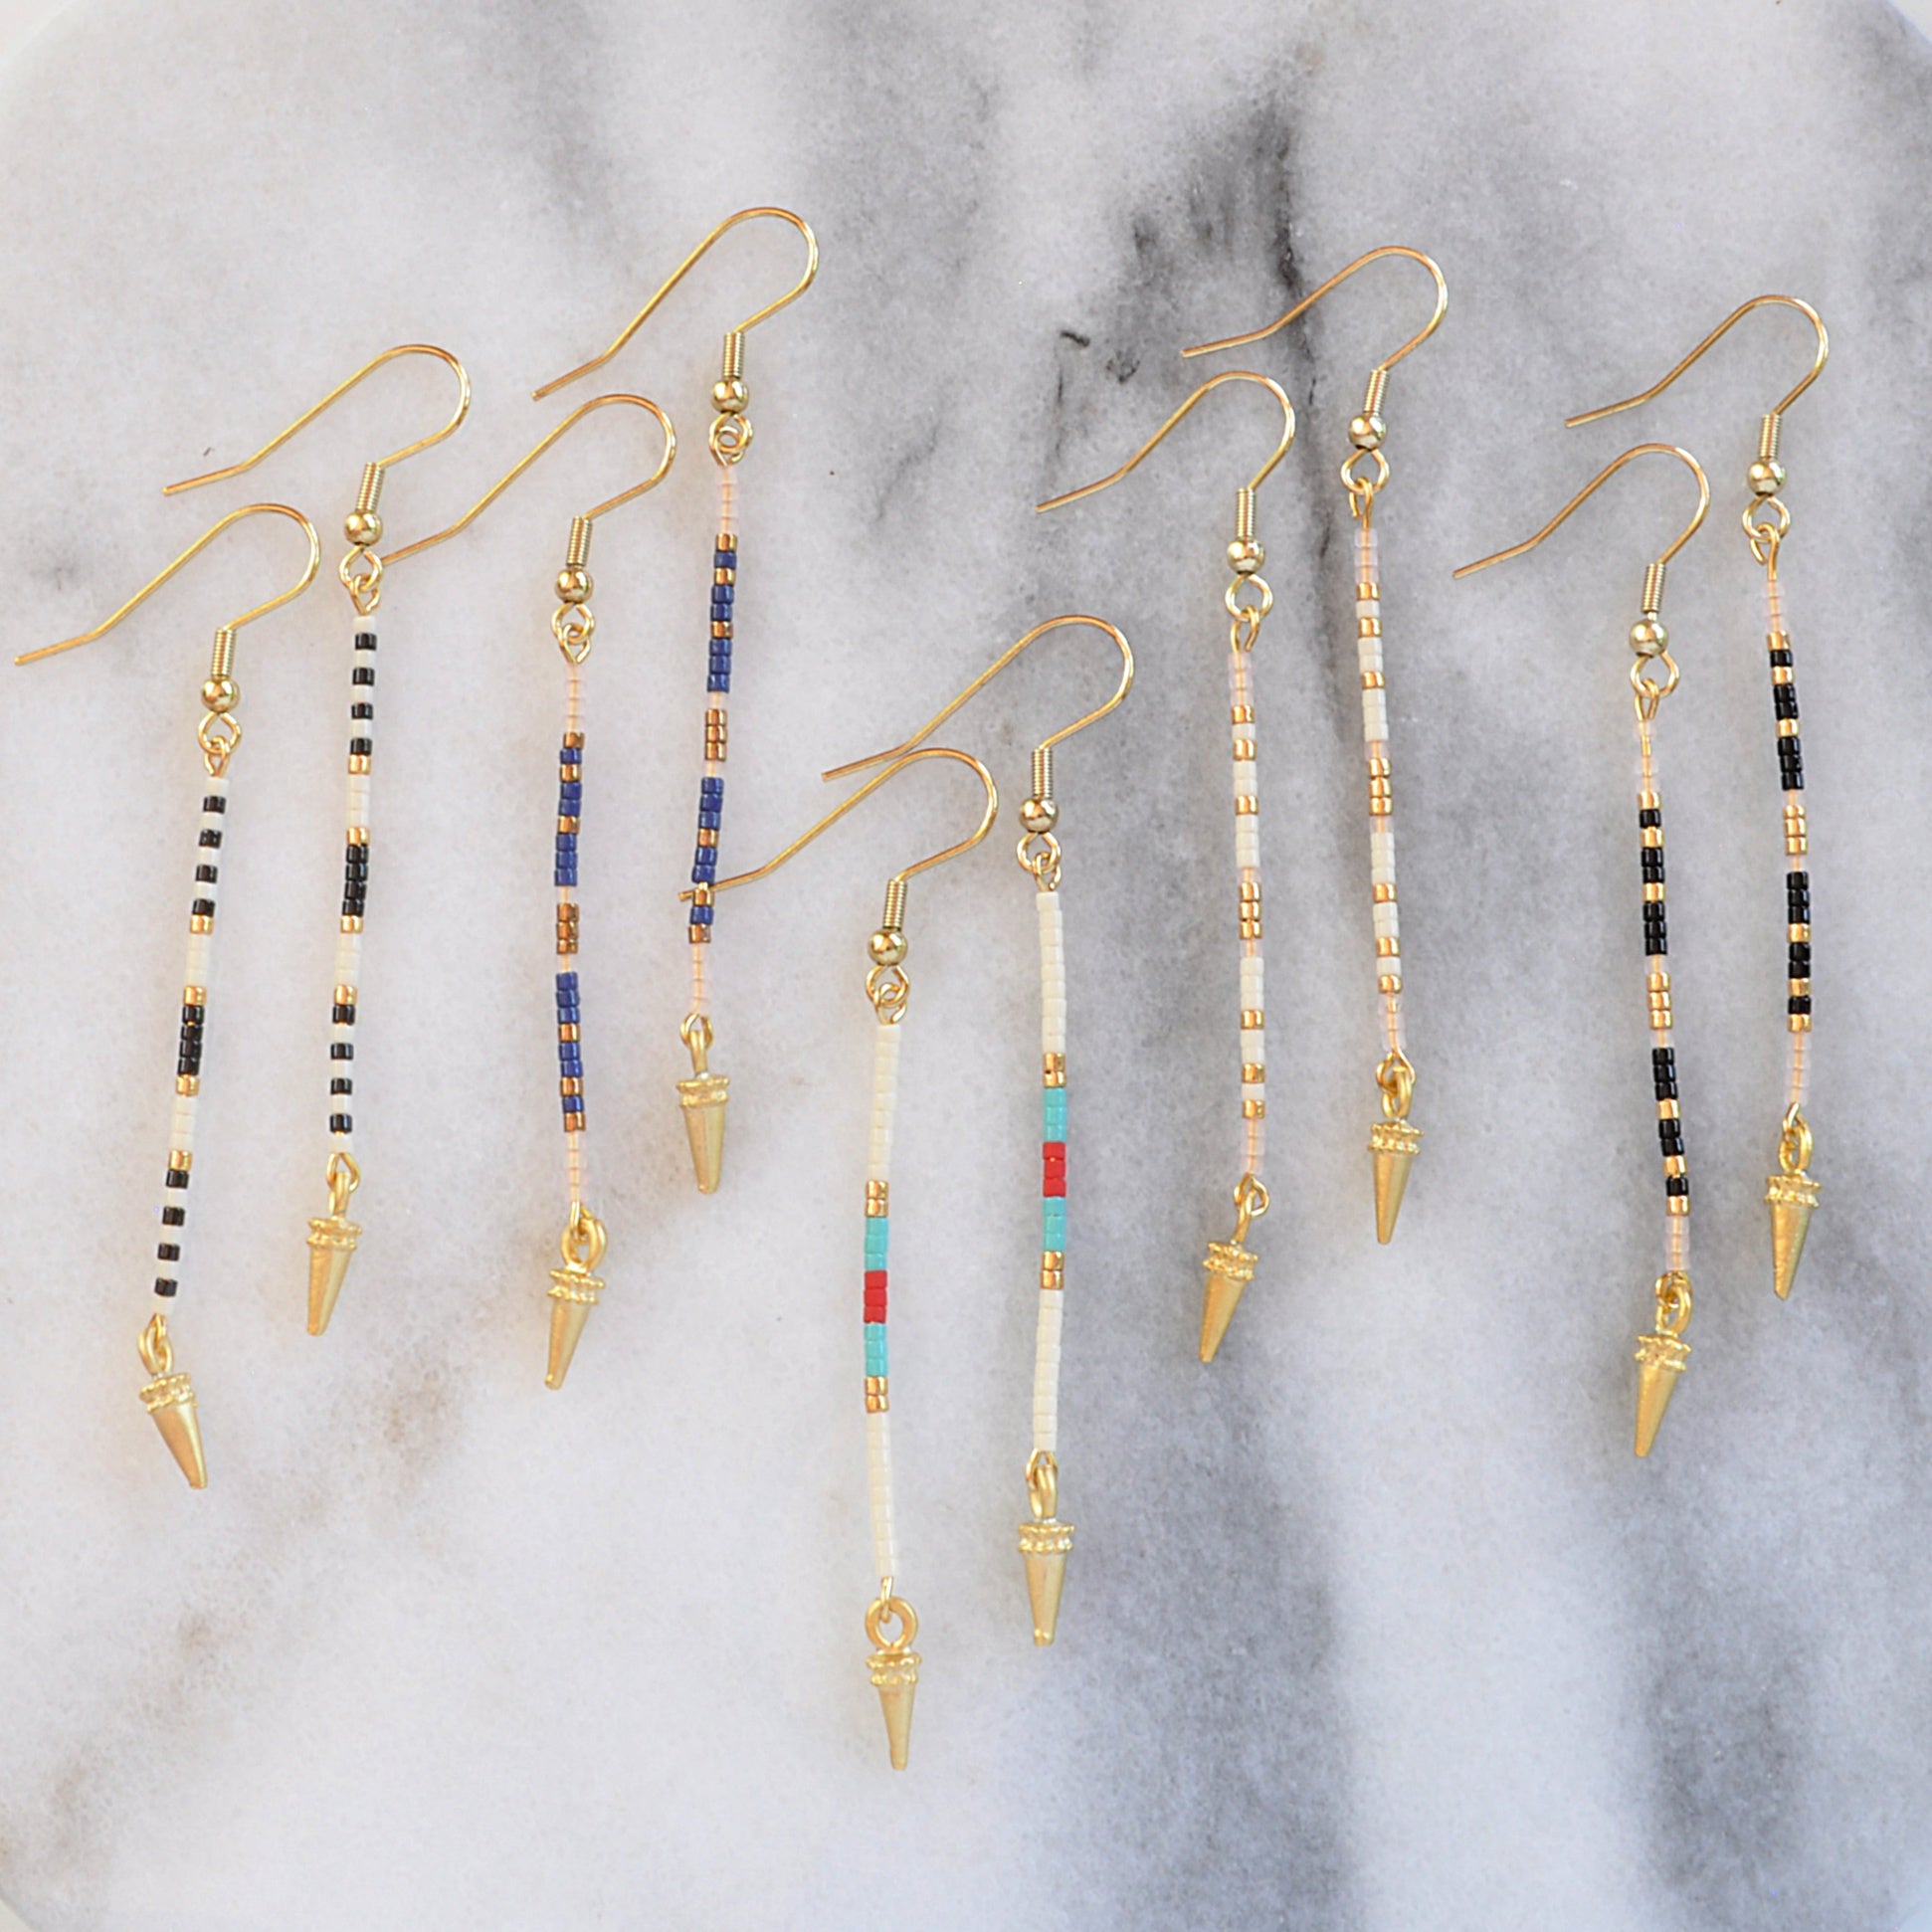 Libby & Smee long linear beaded stick earrings with spike